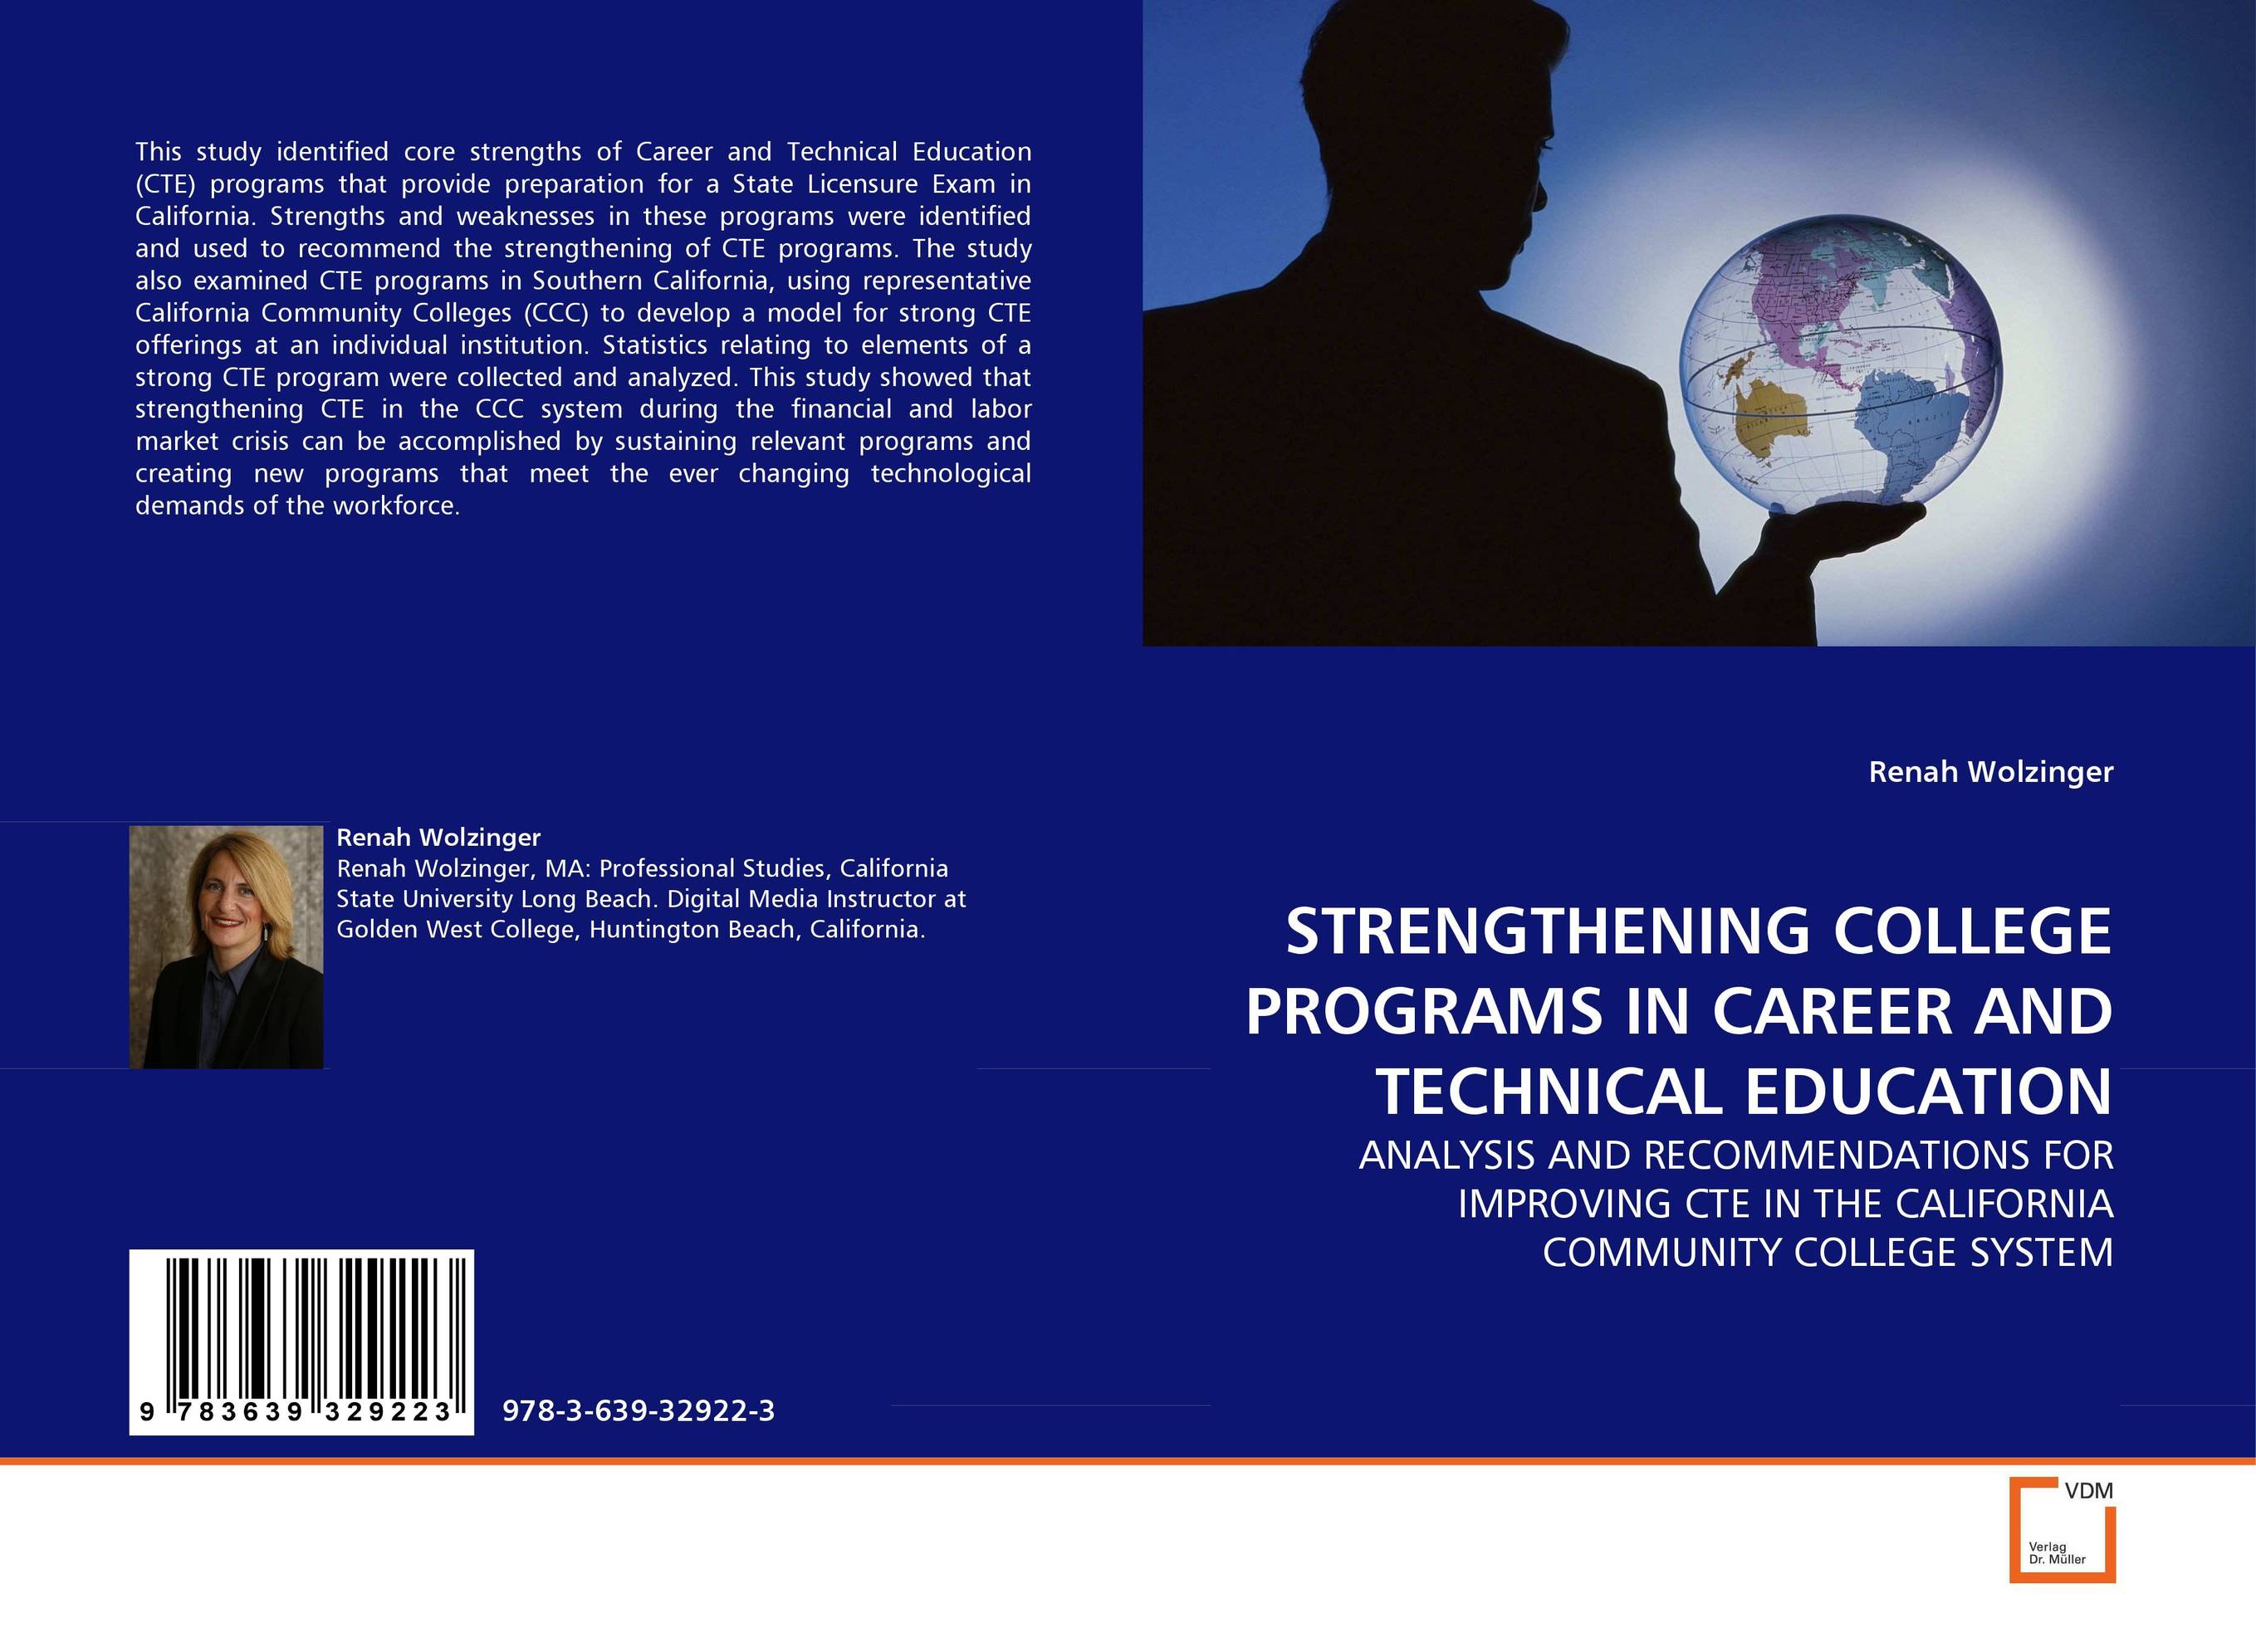 STRENGTHENING COLLEGE PROGRAMS IN CAREER AND TECHNICAL EDUCATION